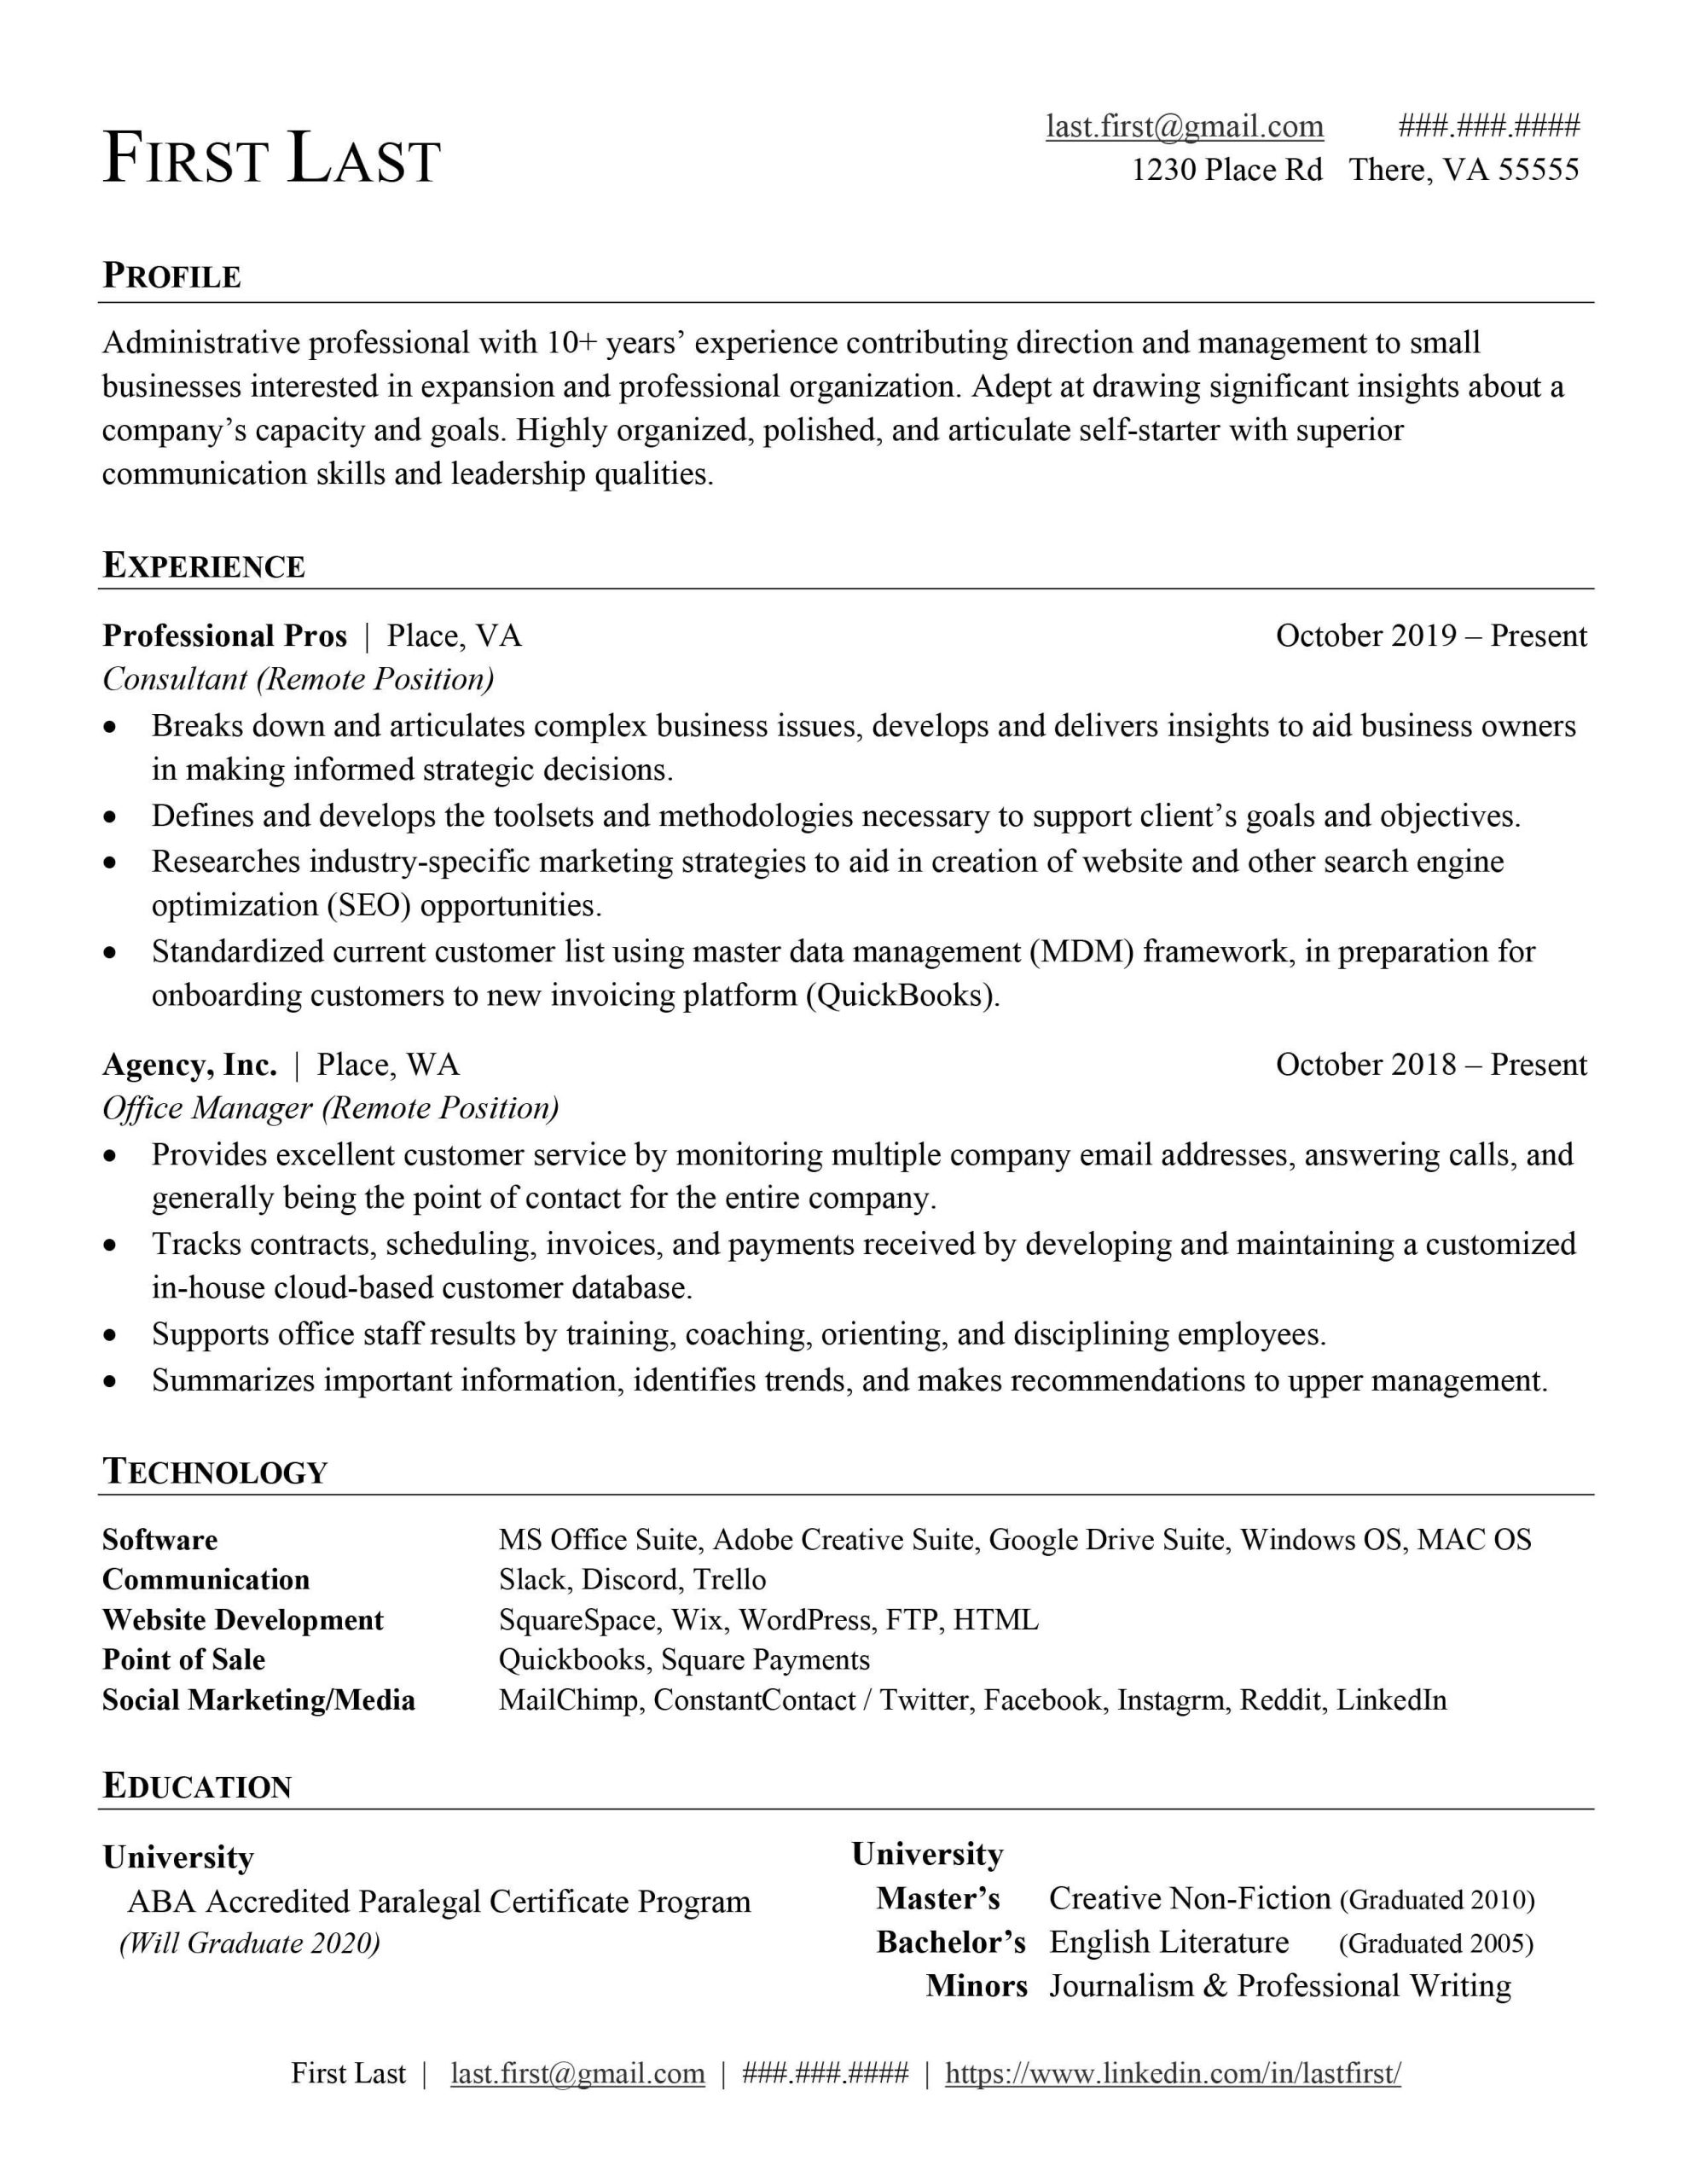 Indeed Sample Resume for Quality Engineer Administrative Professional – Generic Linkedin/indeed Resume (more …